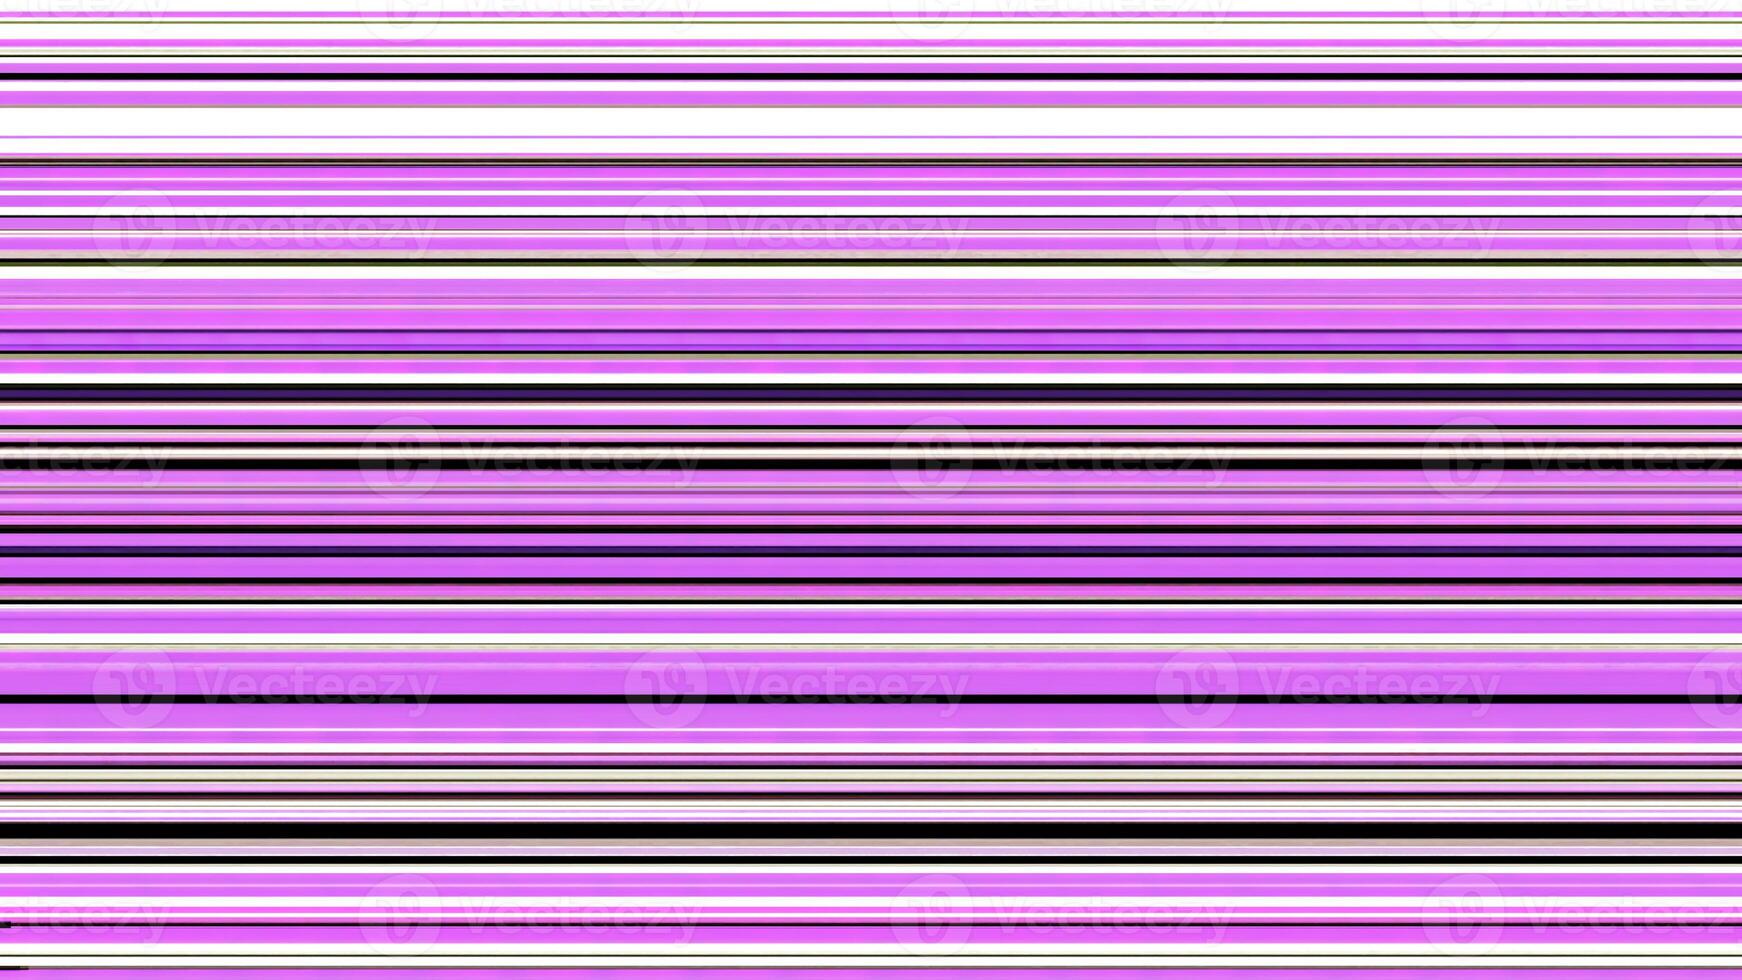 Colored stripes are connected in middle. Animation. Background of bright colored lines moving on top of each other and merging horizontally. Colored lines move up and down merging into each other in photo